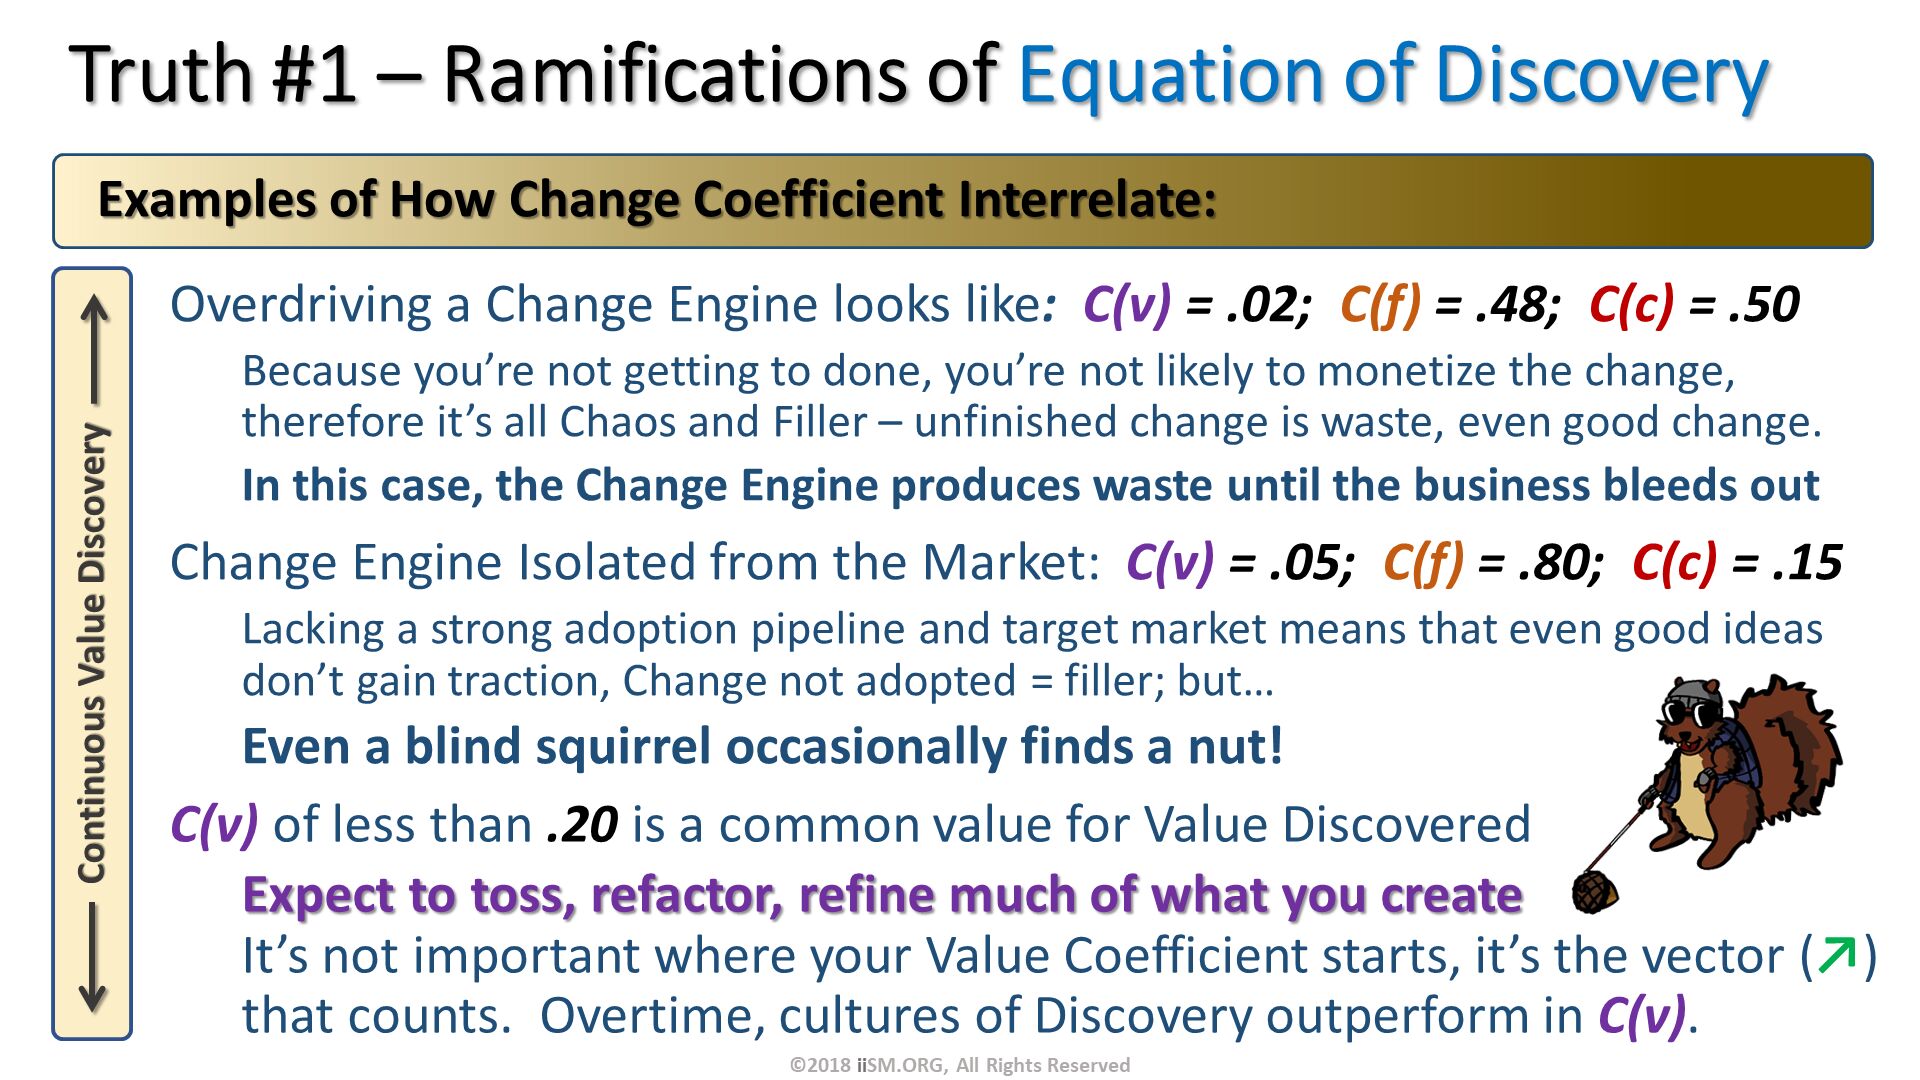 Truth #1 – Ramifications of Equation of Discovery. Overdriving a Change Engine looks like:  C(v) = .02;  C(f) = .48;  C(c) = .50
Because you’re not getting to done, you’re not likely to monetize the change, therefore it’s all Chaos and Filler – unfinished change is waste, even good change.
In this case, the Change Engine produces waste until the business bleeds out
Change Engine Isolated from the Market:  C(v) = .05;  C(f) = .80;  C(c) = .15
Lacking a strong adoption pipeline and target market means that even good ideas don’t gain traction, Change not adopted = filler; but… 
Even a blind squirrel occasionally finds a nut!.   Examples of How Change Coefficient Interrelate:. C(v) of less than .20 is a common value for Value Discovered
Expect to toss, refactor, refine much of what you createIt’s not important where your Value Coefficient starts, it’s the vector (↗) that counts.  Overtime, cultures of Discovery outperform in C(v).
. ©2018 iiSM.ORG, All Rights Reserved. 